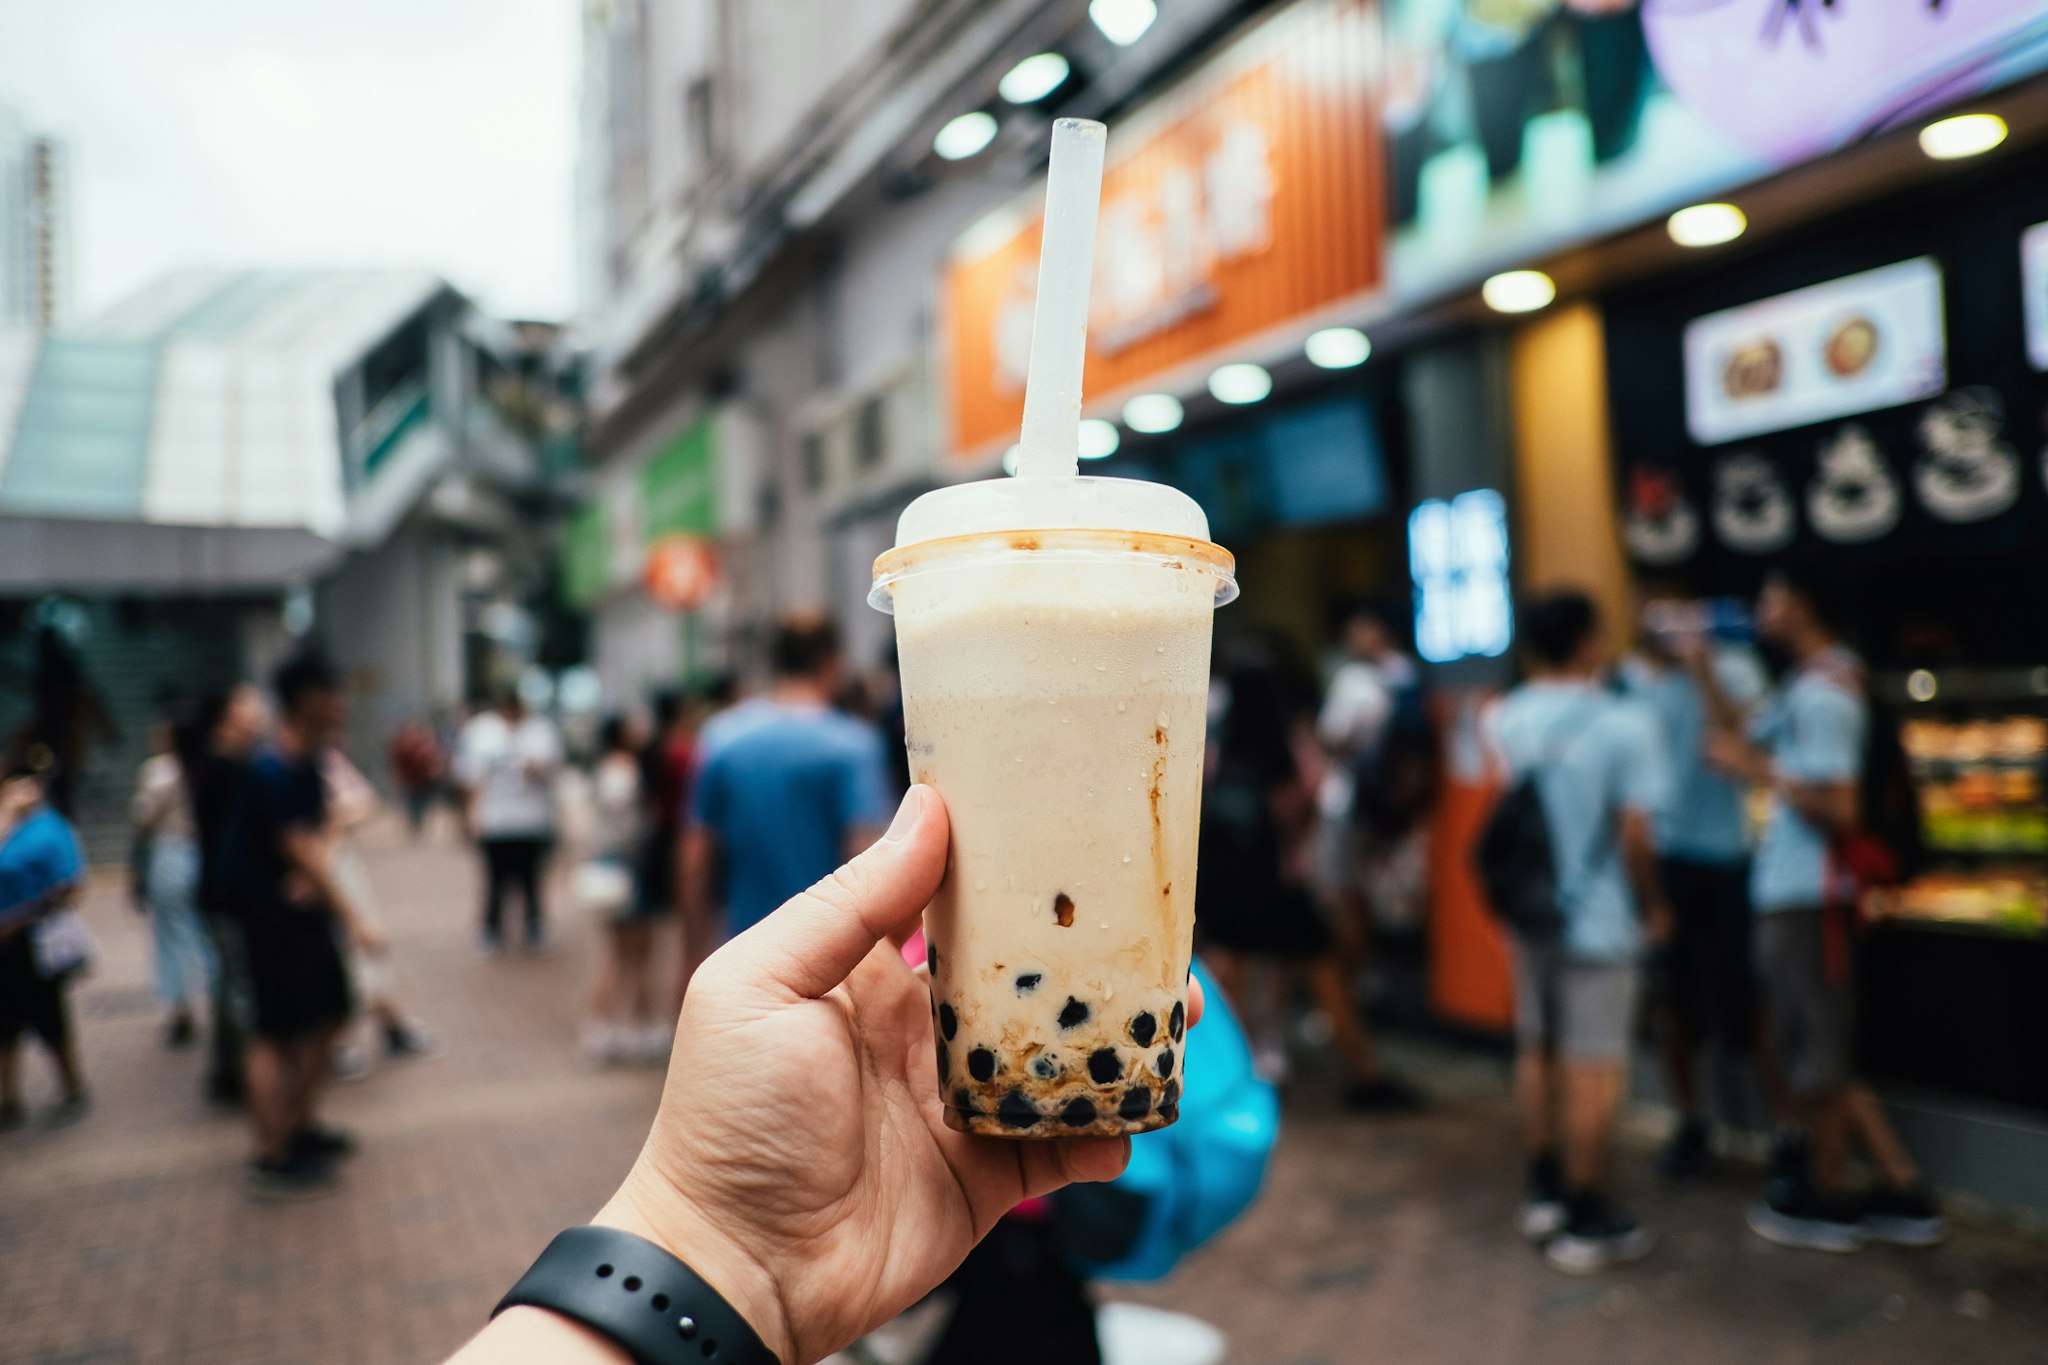 Human hand holding a bottle of iced cold bubble tea against city street in a hot summer day